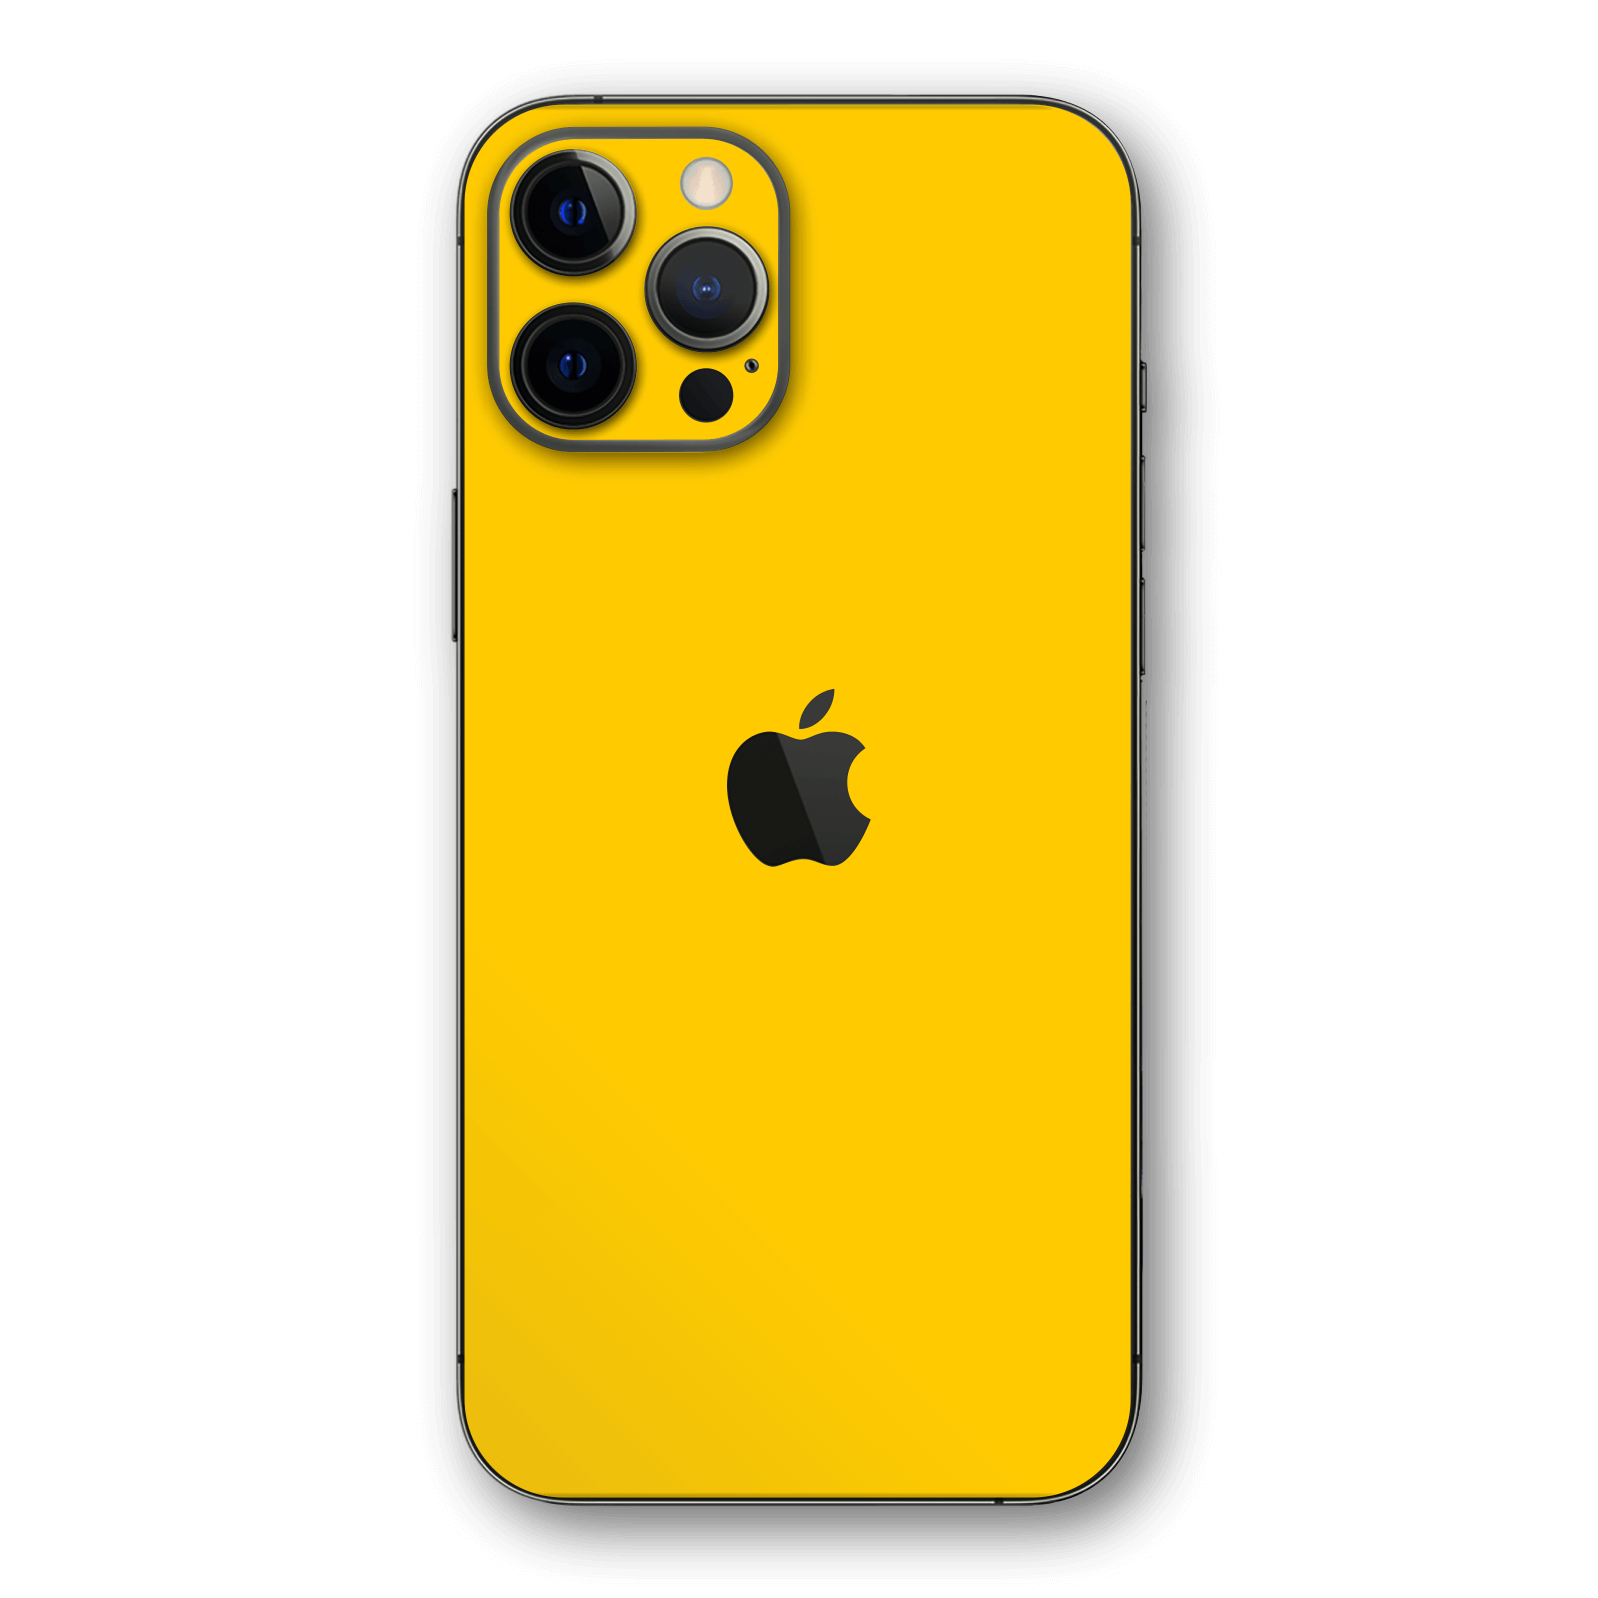 Iphone 12 Pro Max Glossy Golden Yellow Skin Wrap Decal Easyskinz